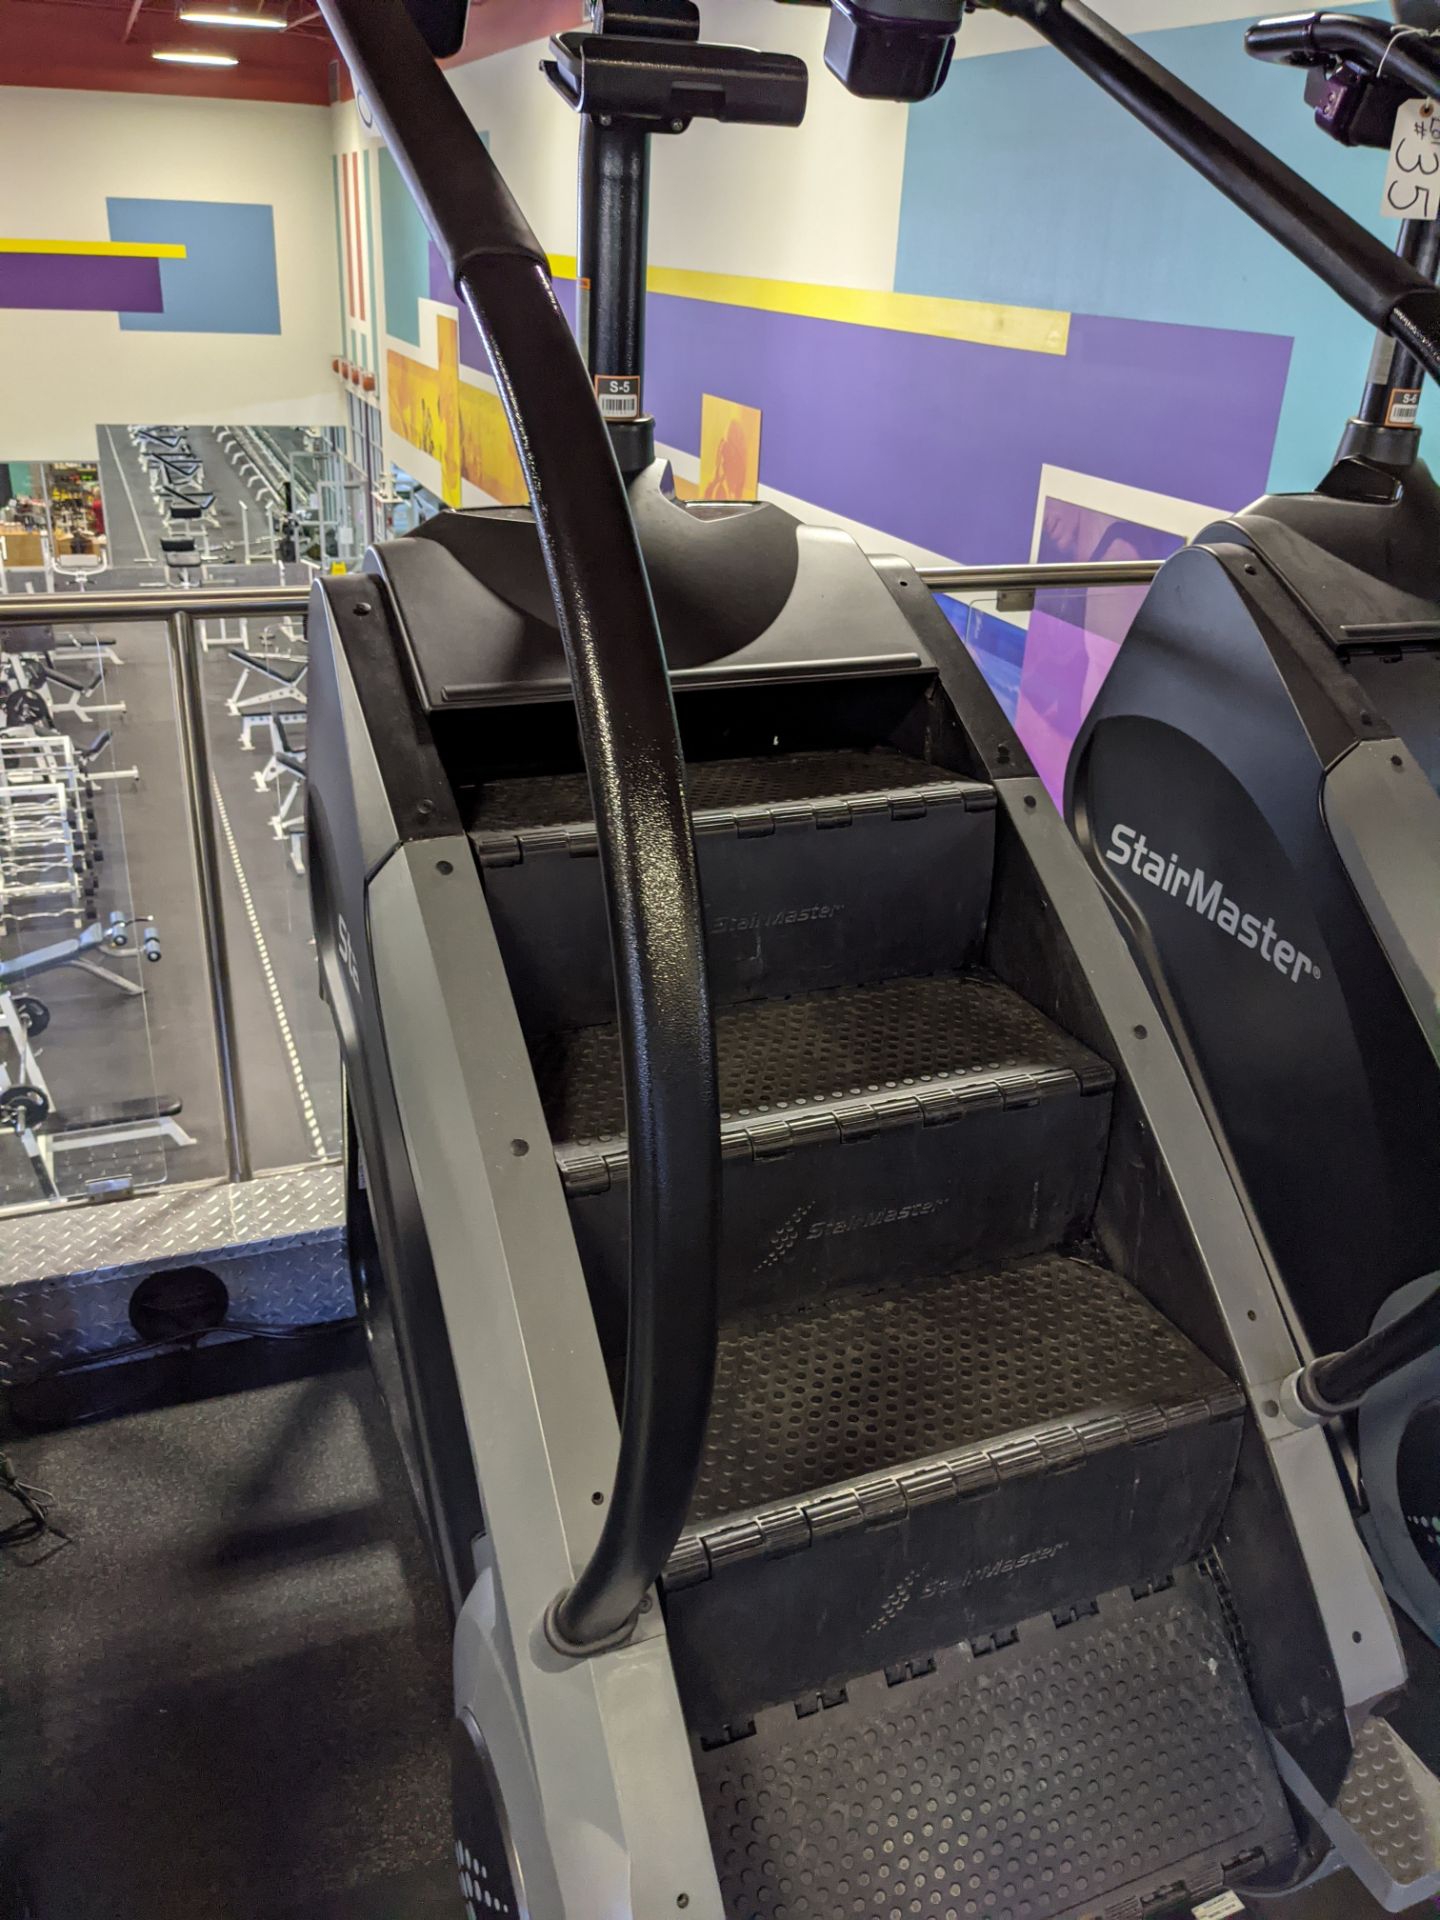 Stair Master - Image 3 of 4